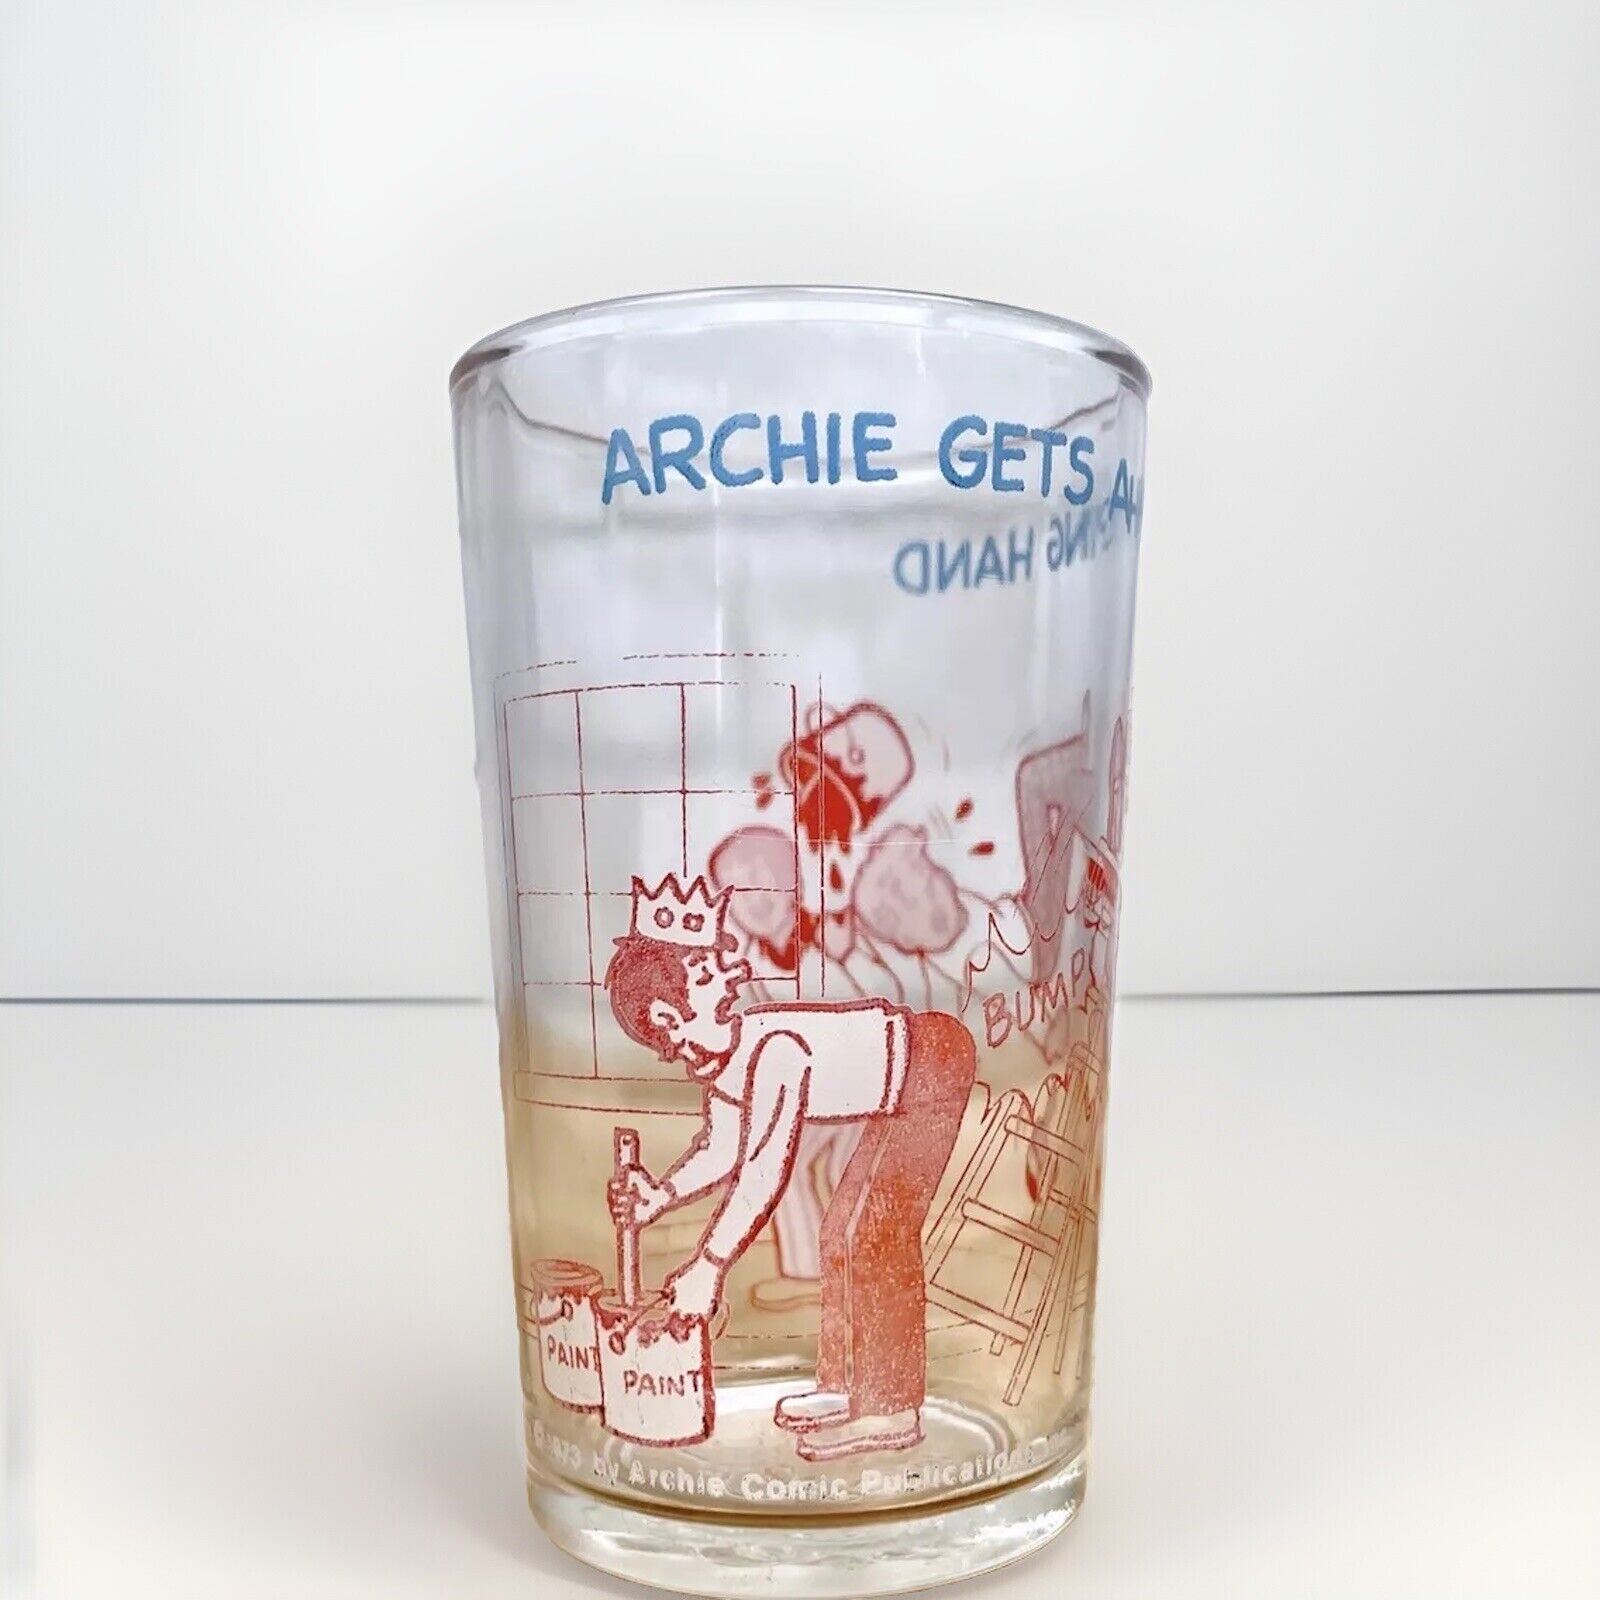 Vintage 1973 Archie Comic Jelly Glass Archie Gets a Helping Hand